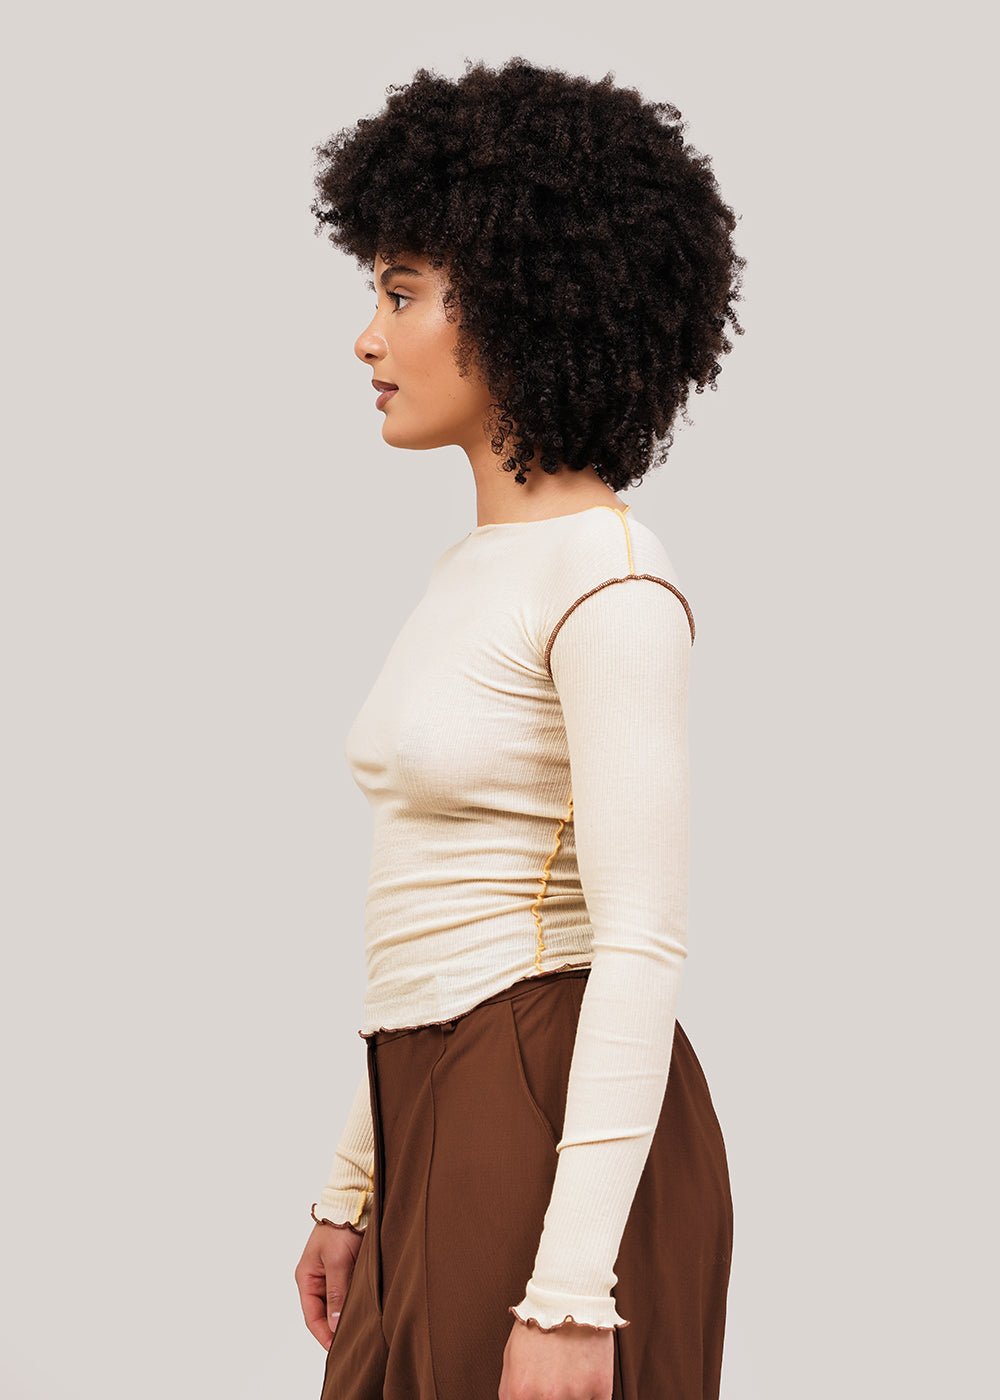 Round Sleeve Cropped Sweatshirt in Beige by AMOMENTO – New Classics Studios